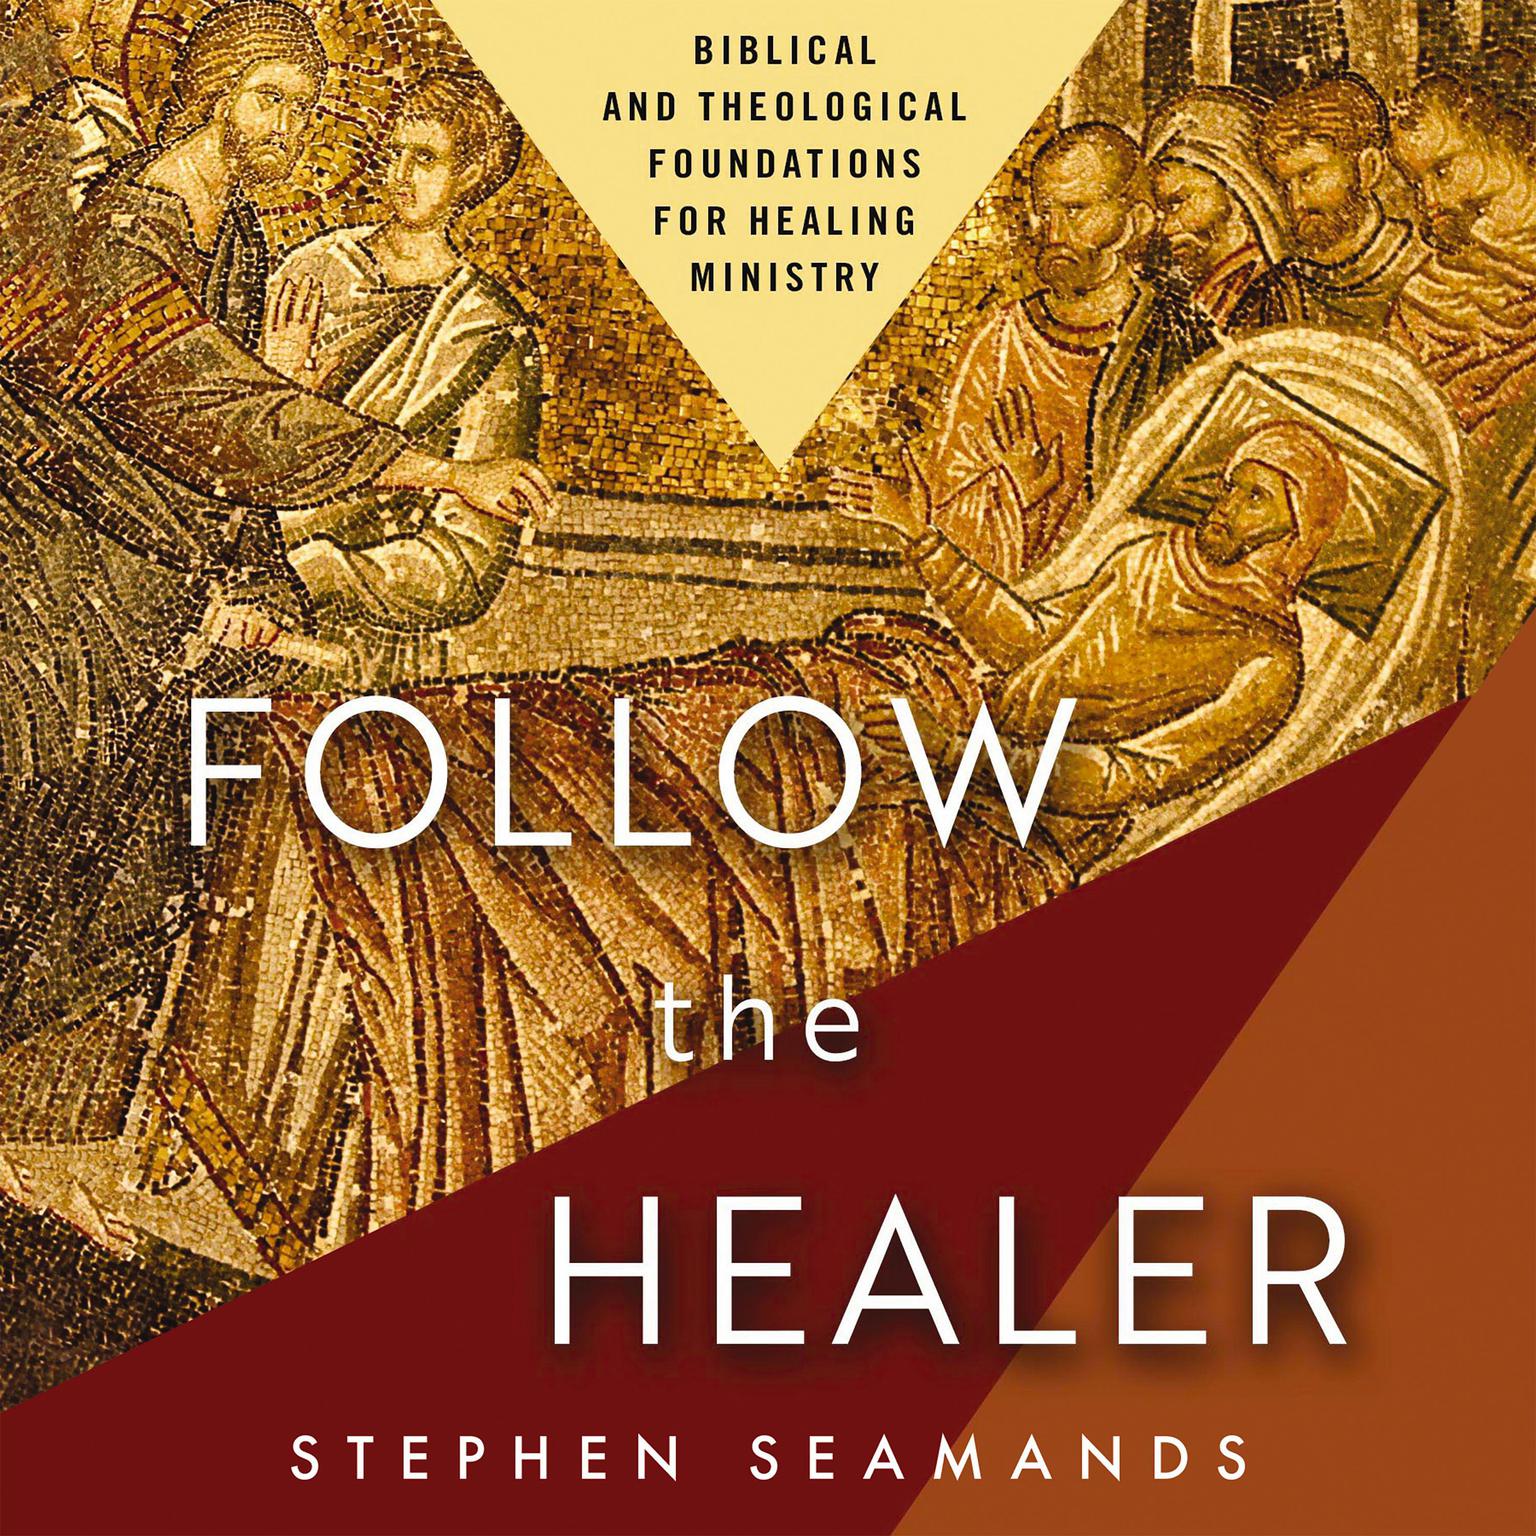 Follow the Healer: Biblical and Theological Foundations for Healing Ministry Audiobook, by Stephen Seamands